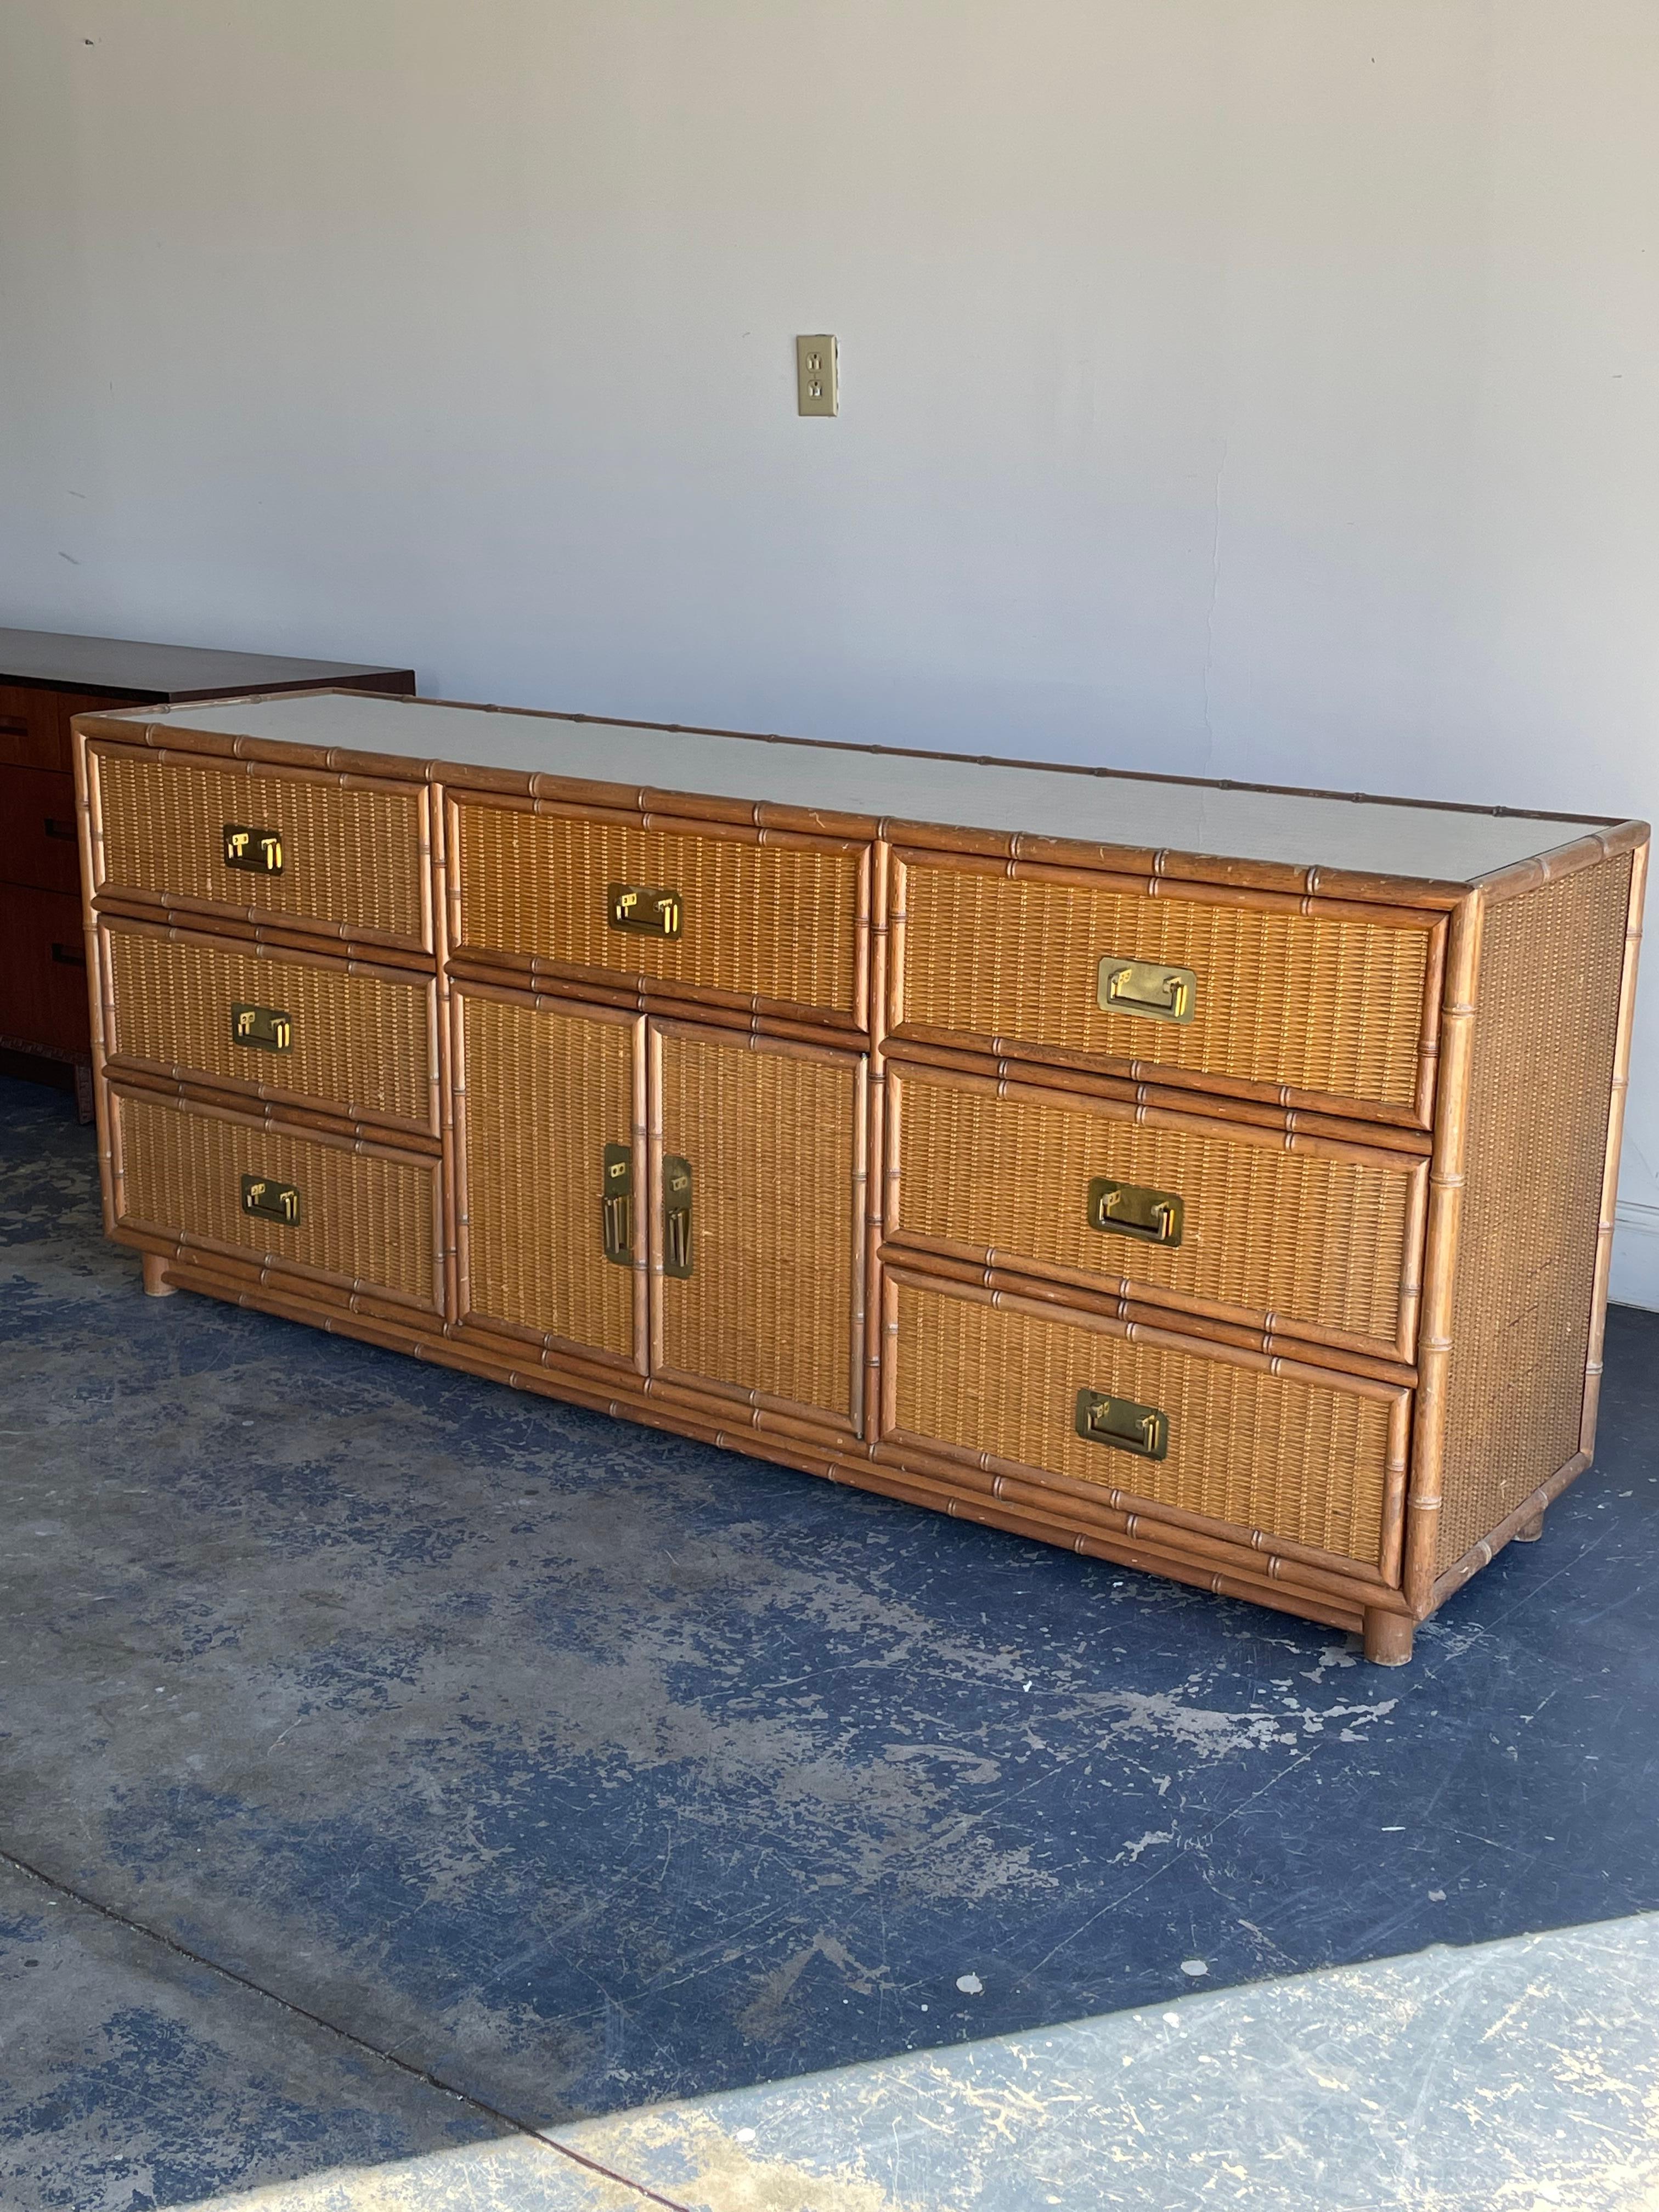 Vintage faux bamboo and rattan sideboard or dresser. Features bamboo framed case with rattan covered drawer fronts, sides, and top. Completed with brass hardware.